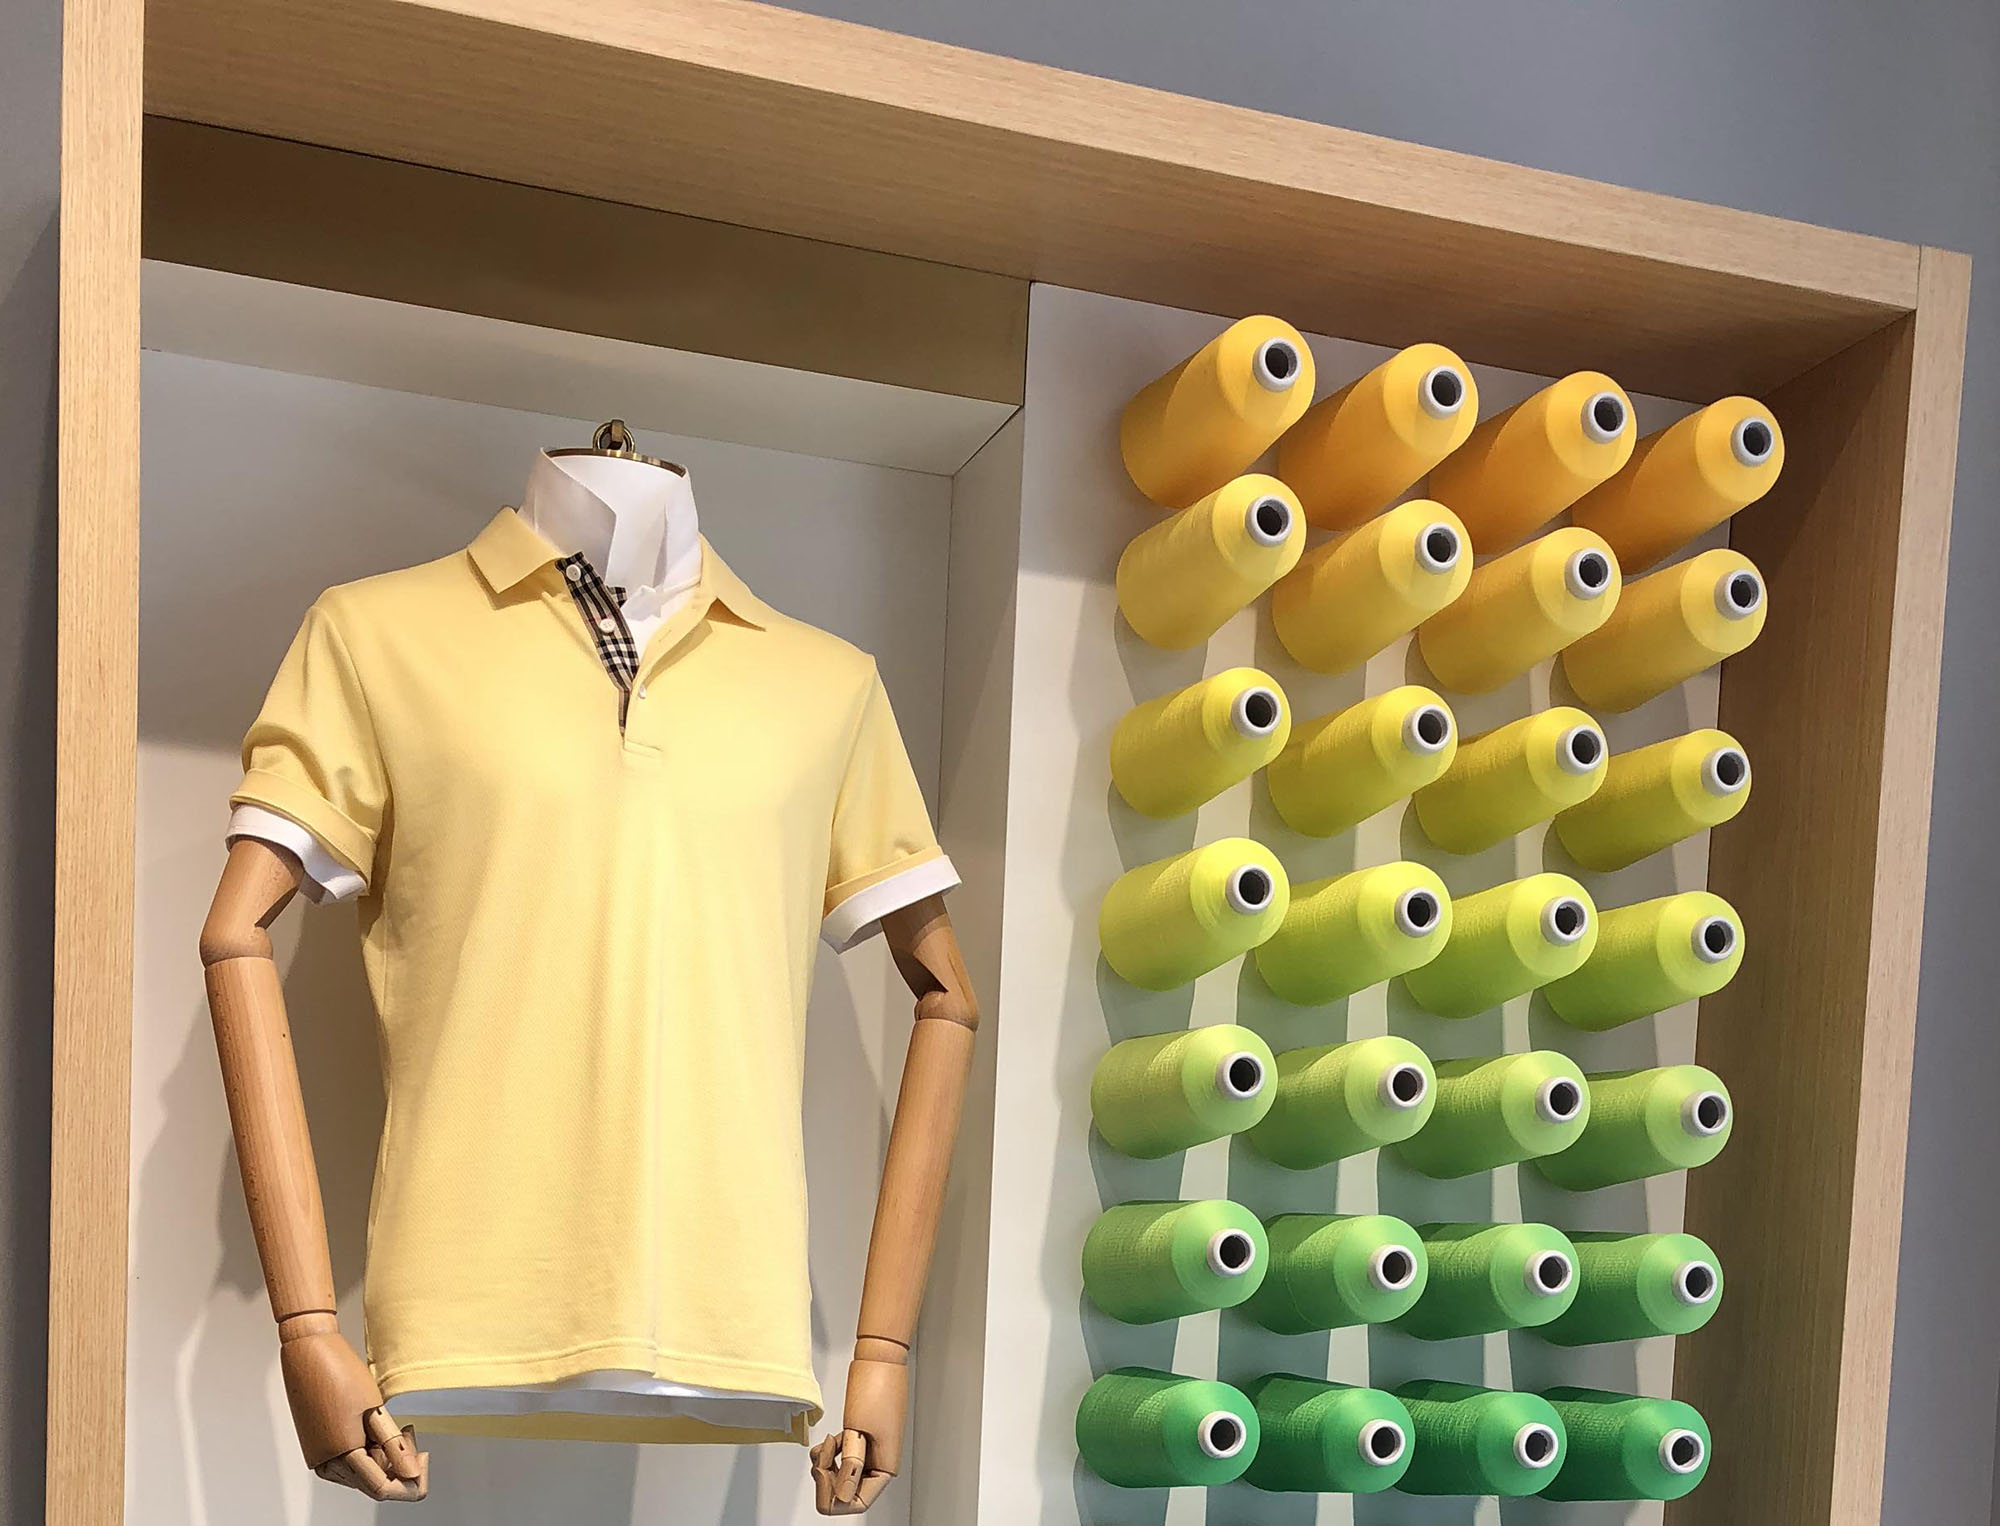 How to choose a cotton or polyester shirt?